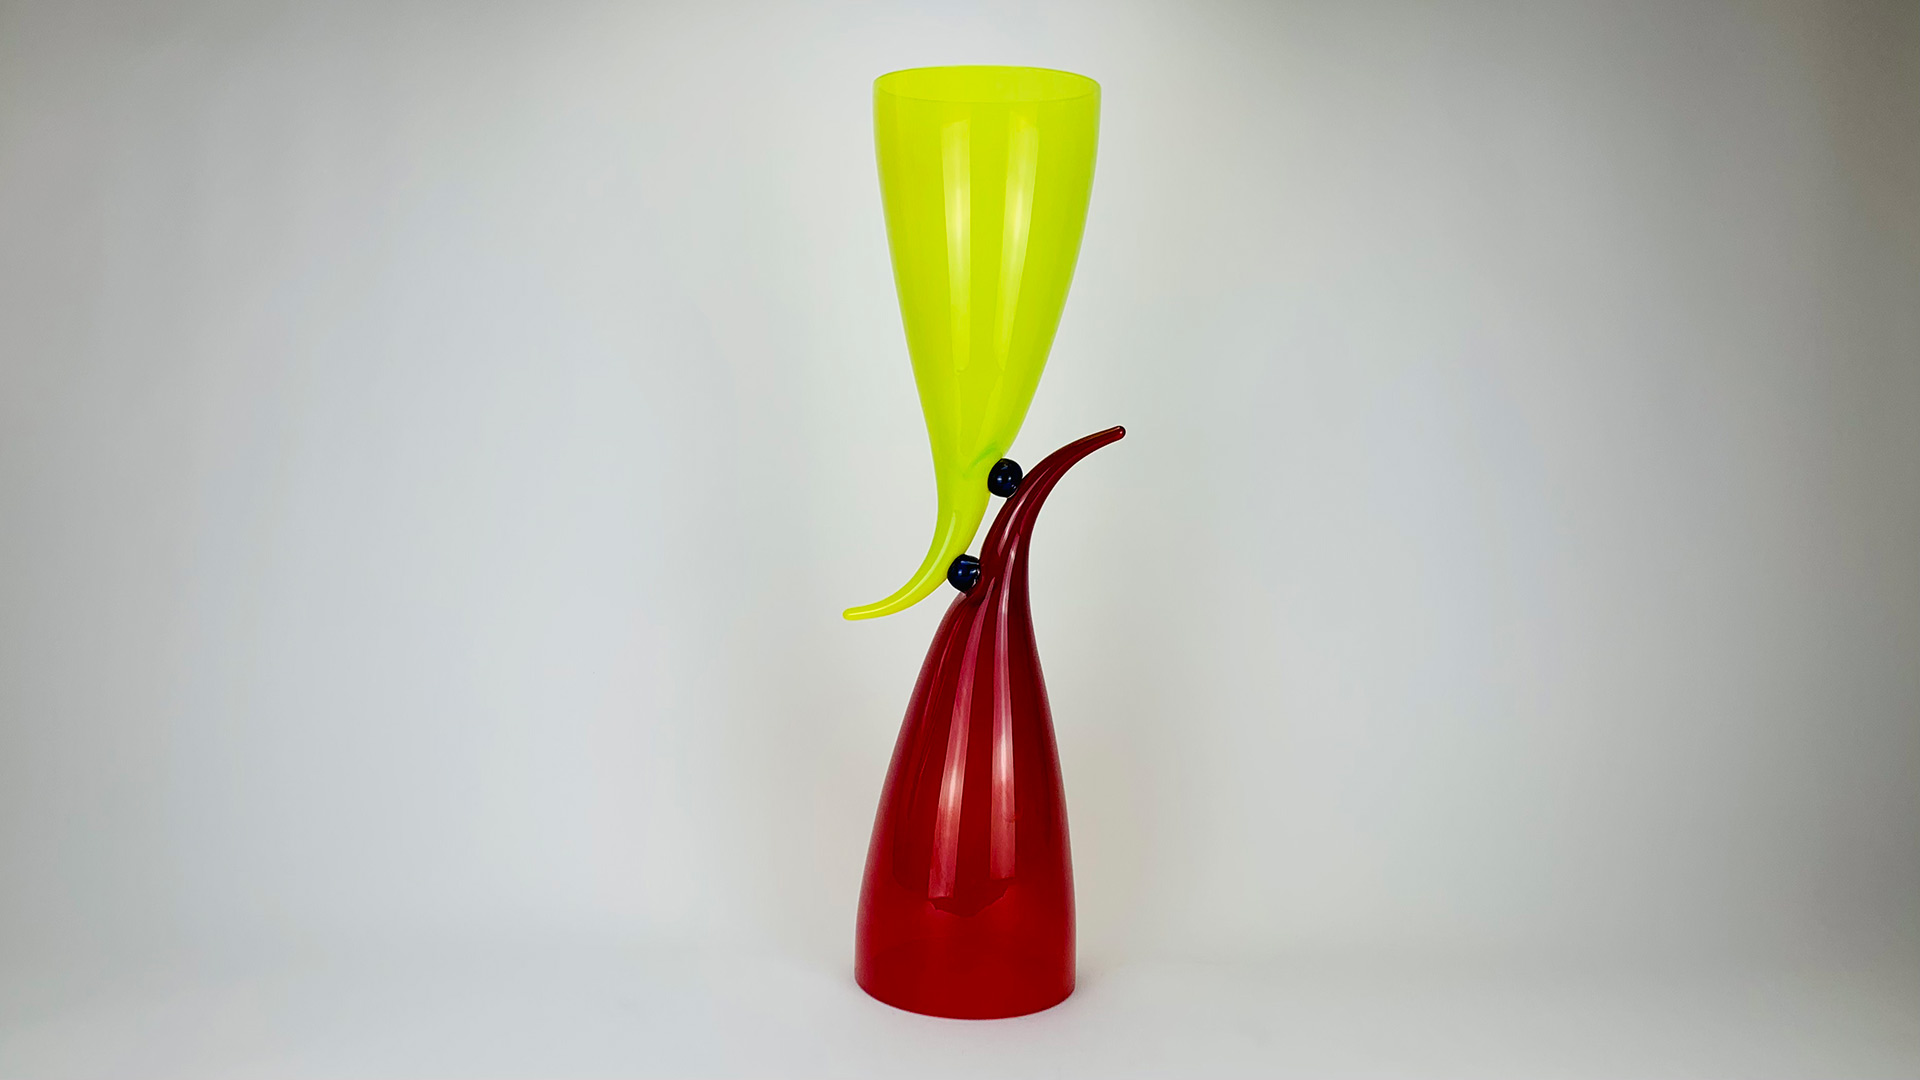 Richard-royal-relationship-series-r94-47-red-yellow-glass-sculpture